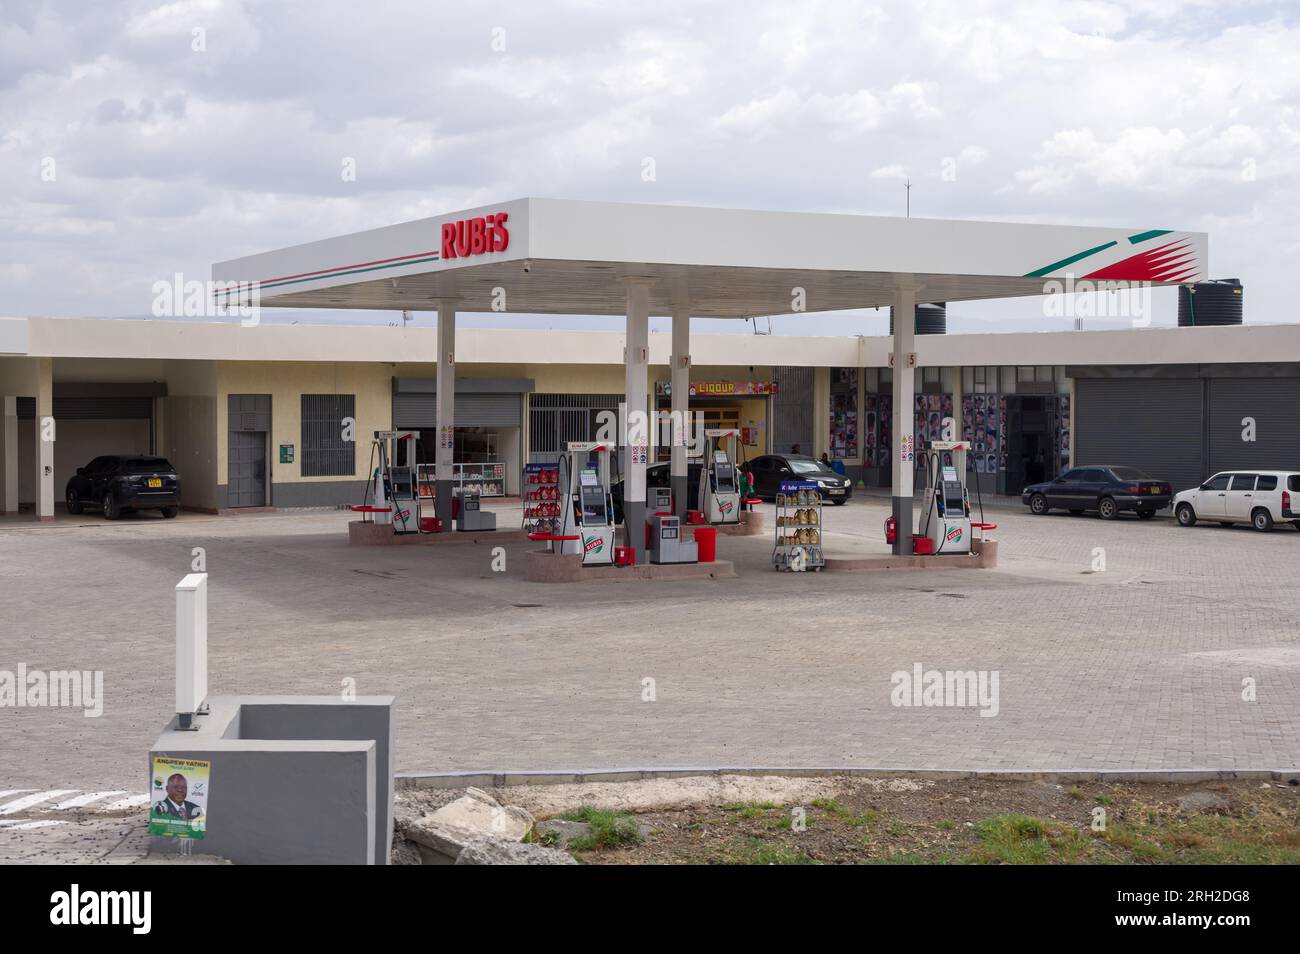 Exterior of a Rubis petrol fuel station with pumps and vehicles parked nearby, Nakuru, Kenya Stock Photo